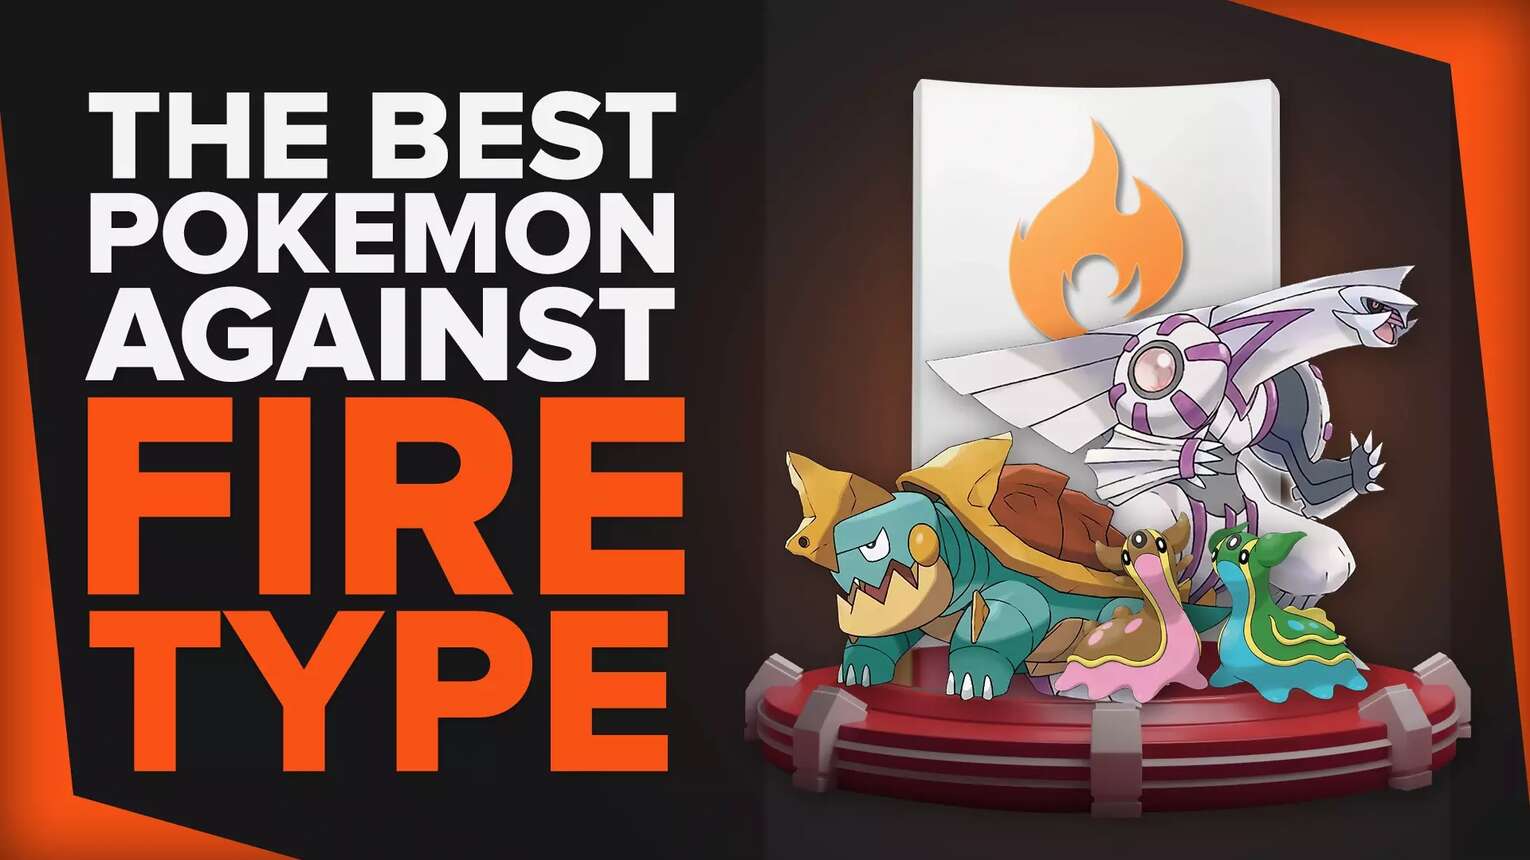 The 10 Pokemon That Are Best Against Fire Type Pokemon